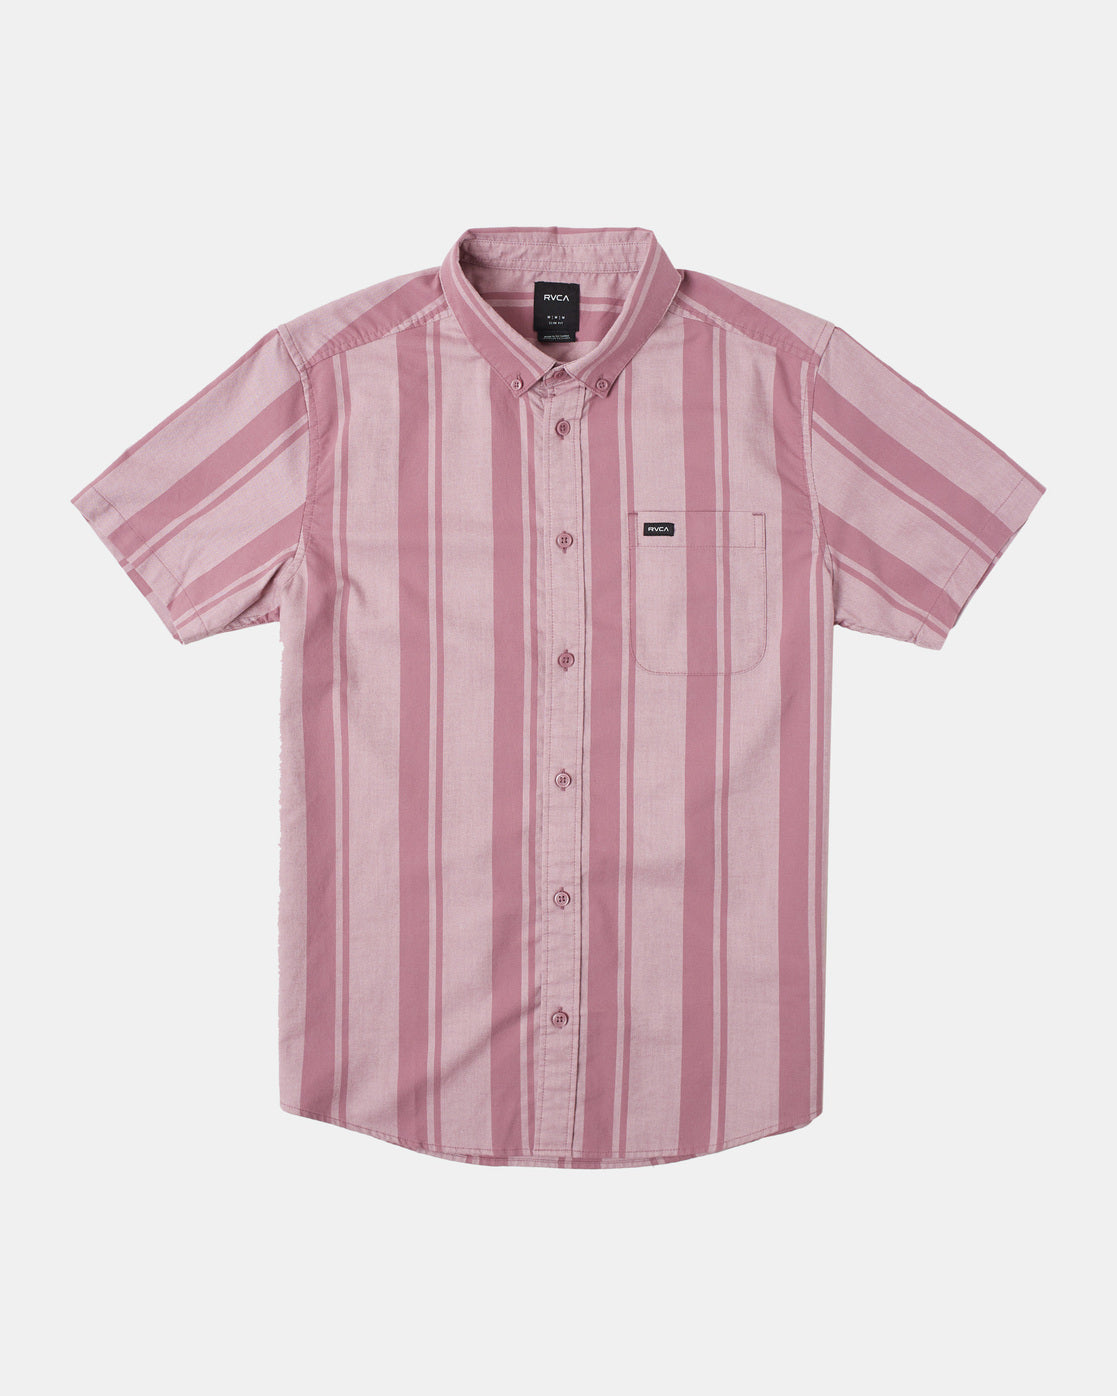 RVCA - That'll Do Stretch Stripe Short Sleeve Button Up